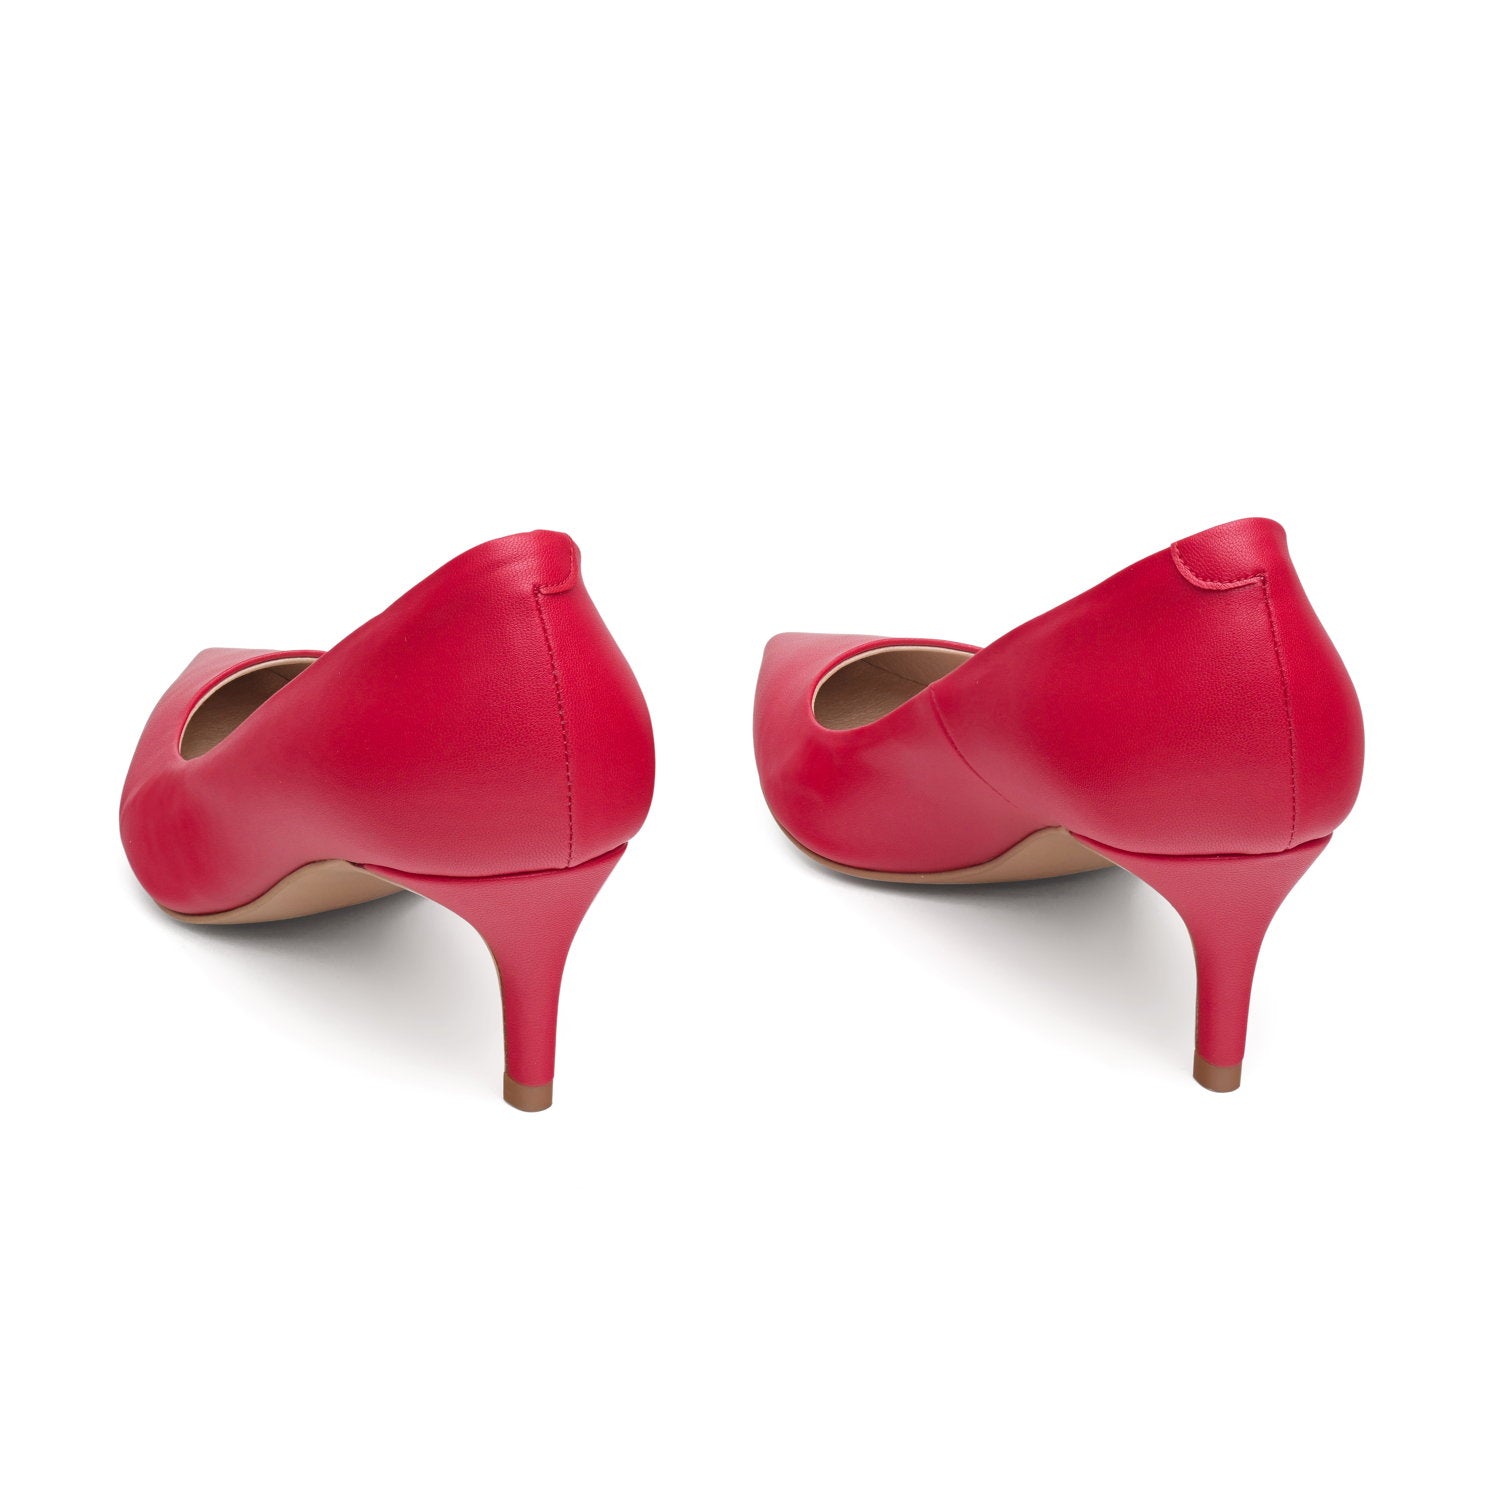 The Red – vegane 50mm Pumps